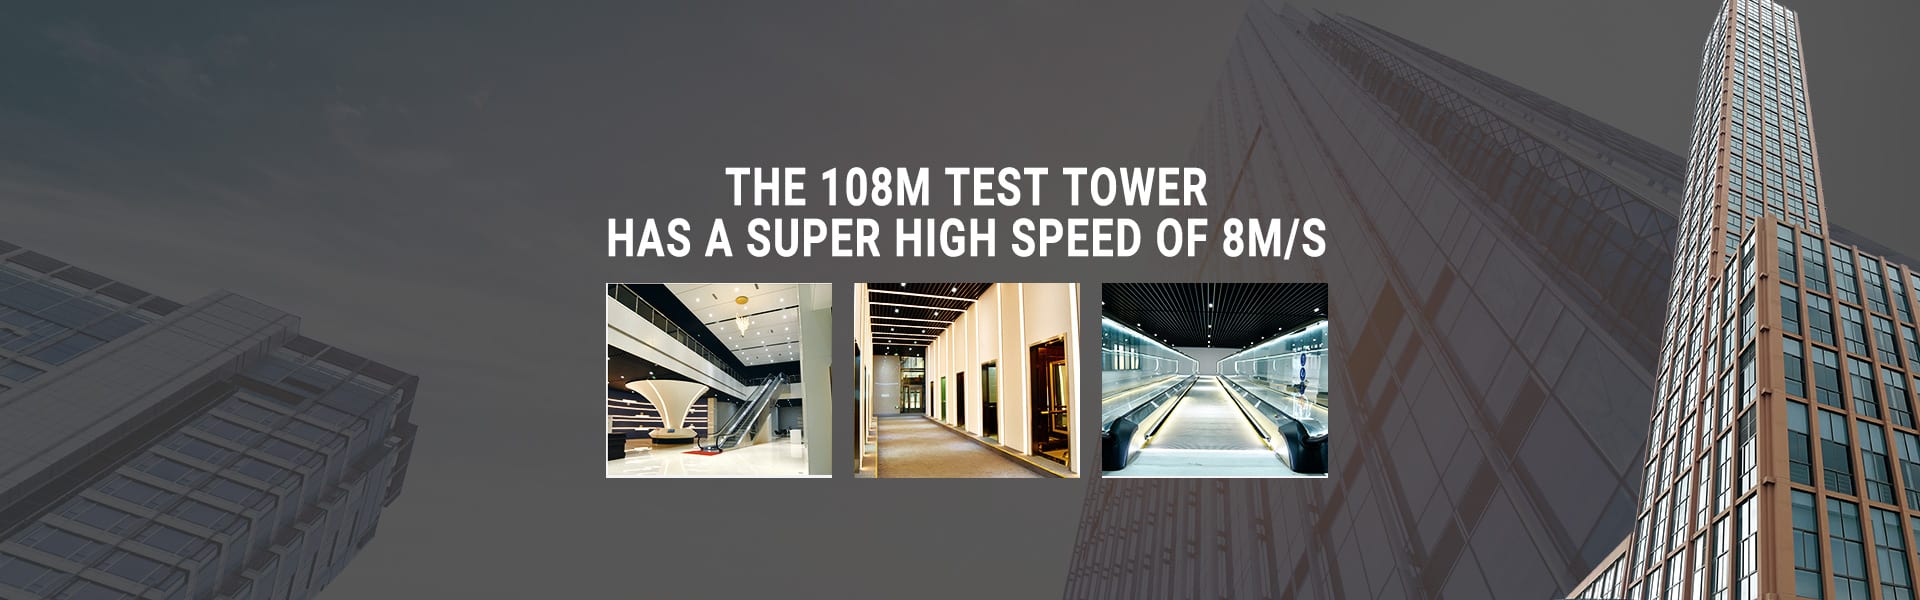 Ang 108M test tower